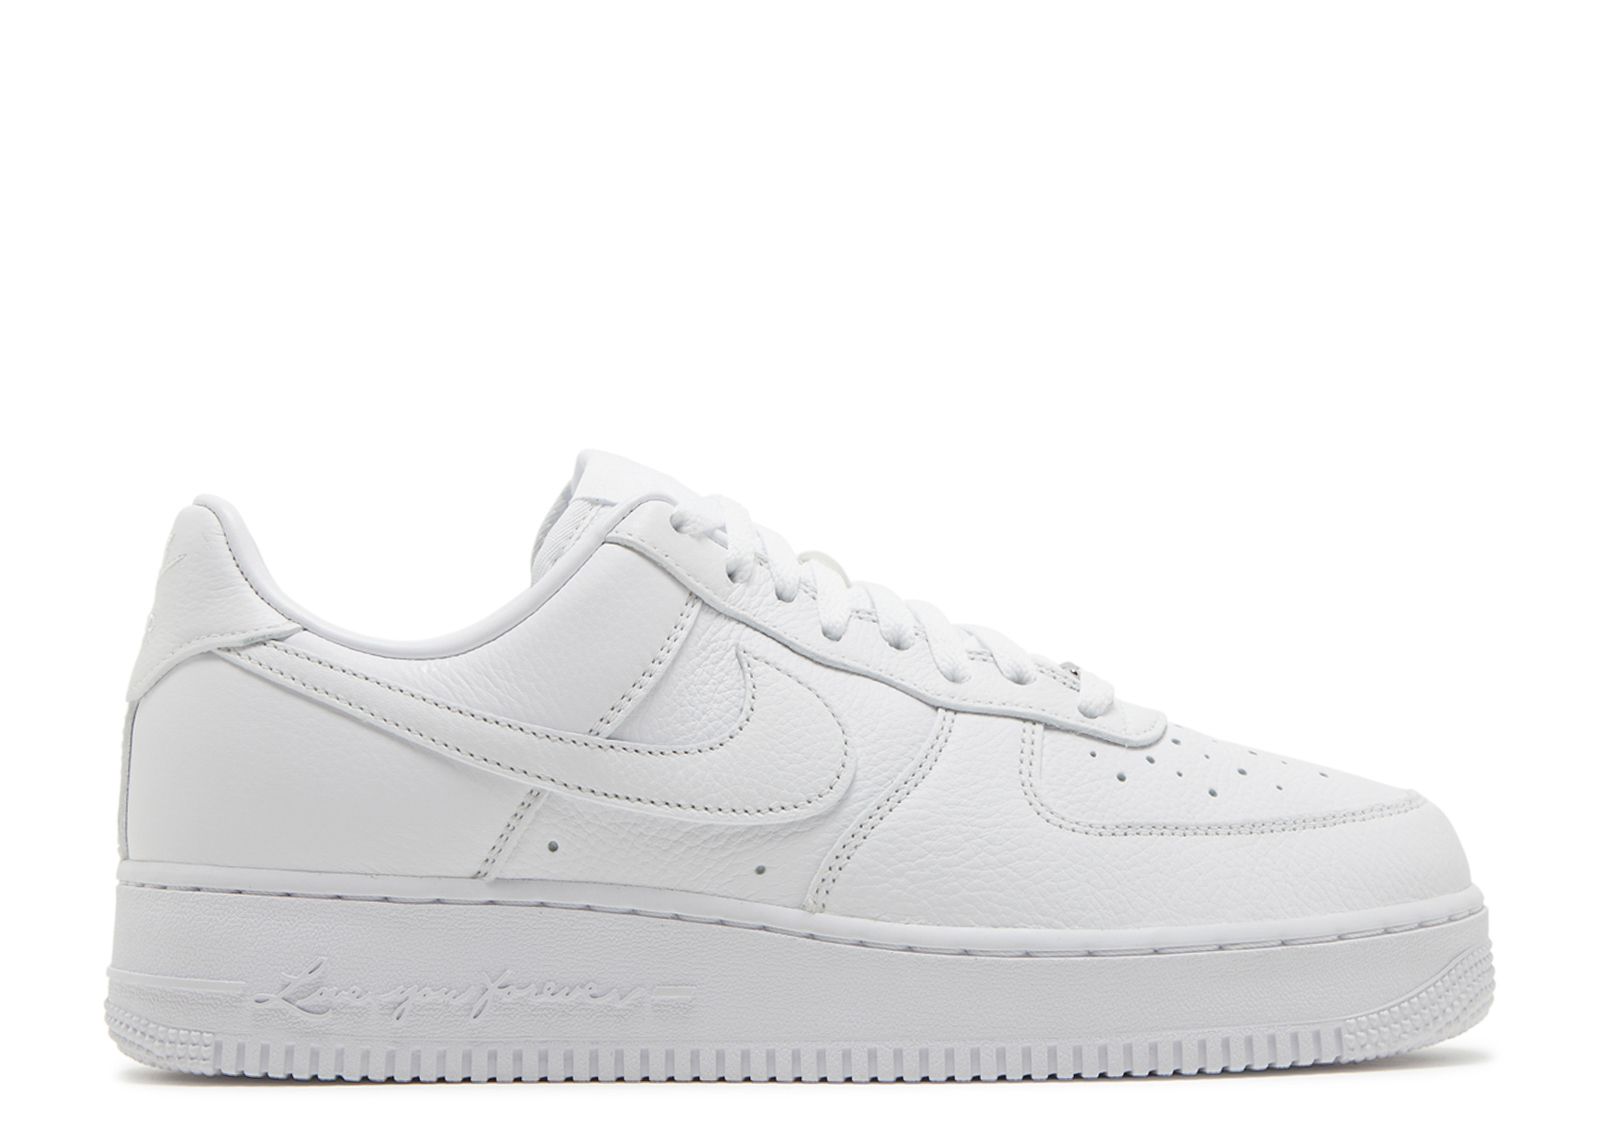 Drake NOCTA x Nike Air Force 1 Certified Lover Boy CZ8065-100 Release Date